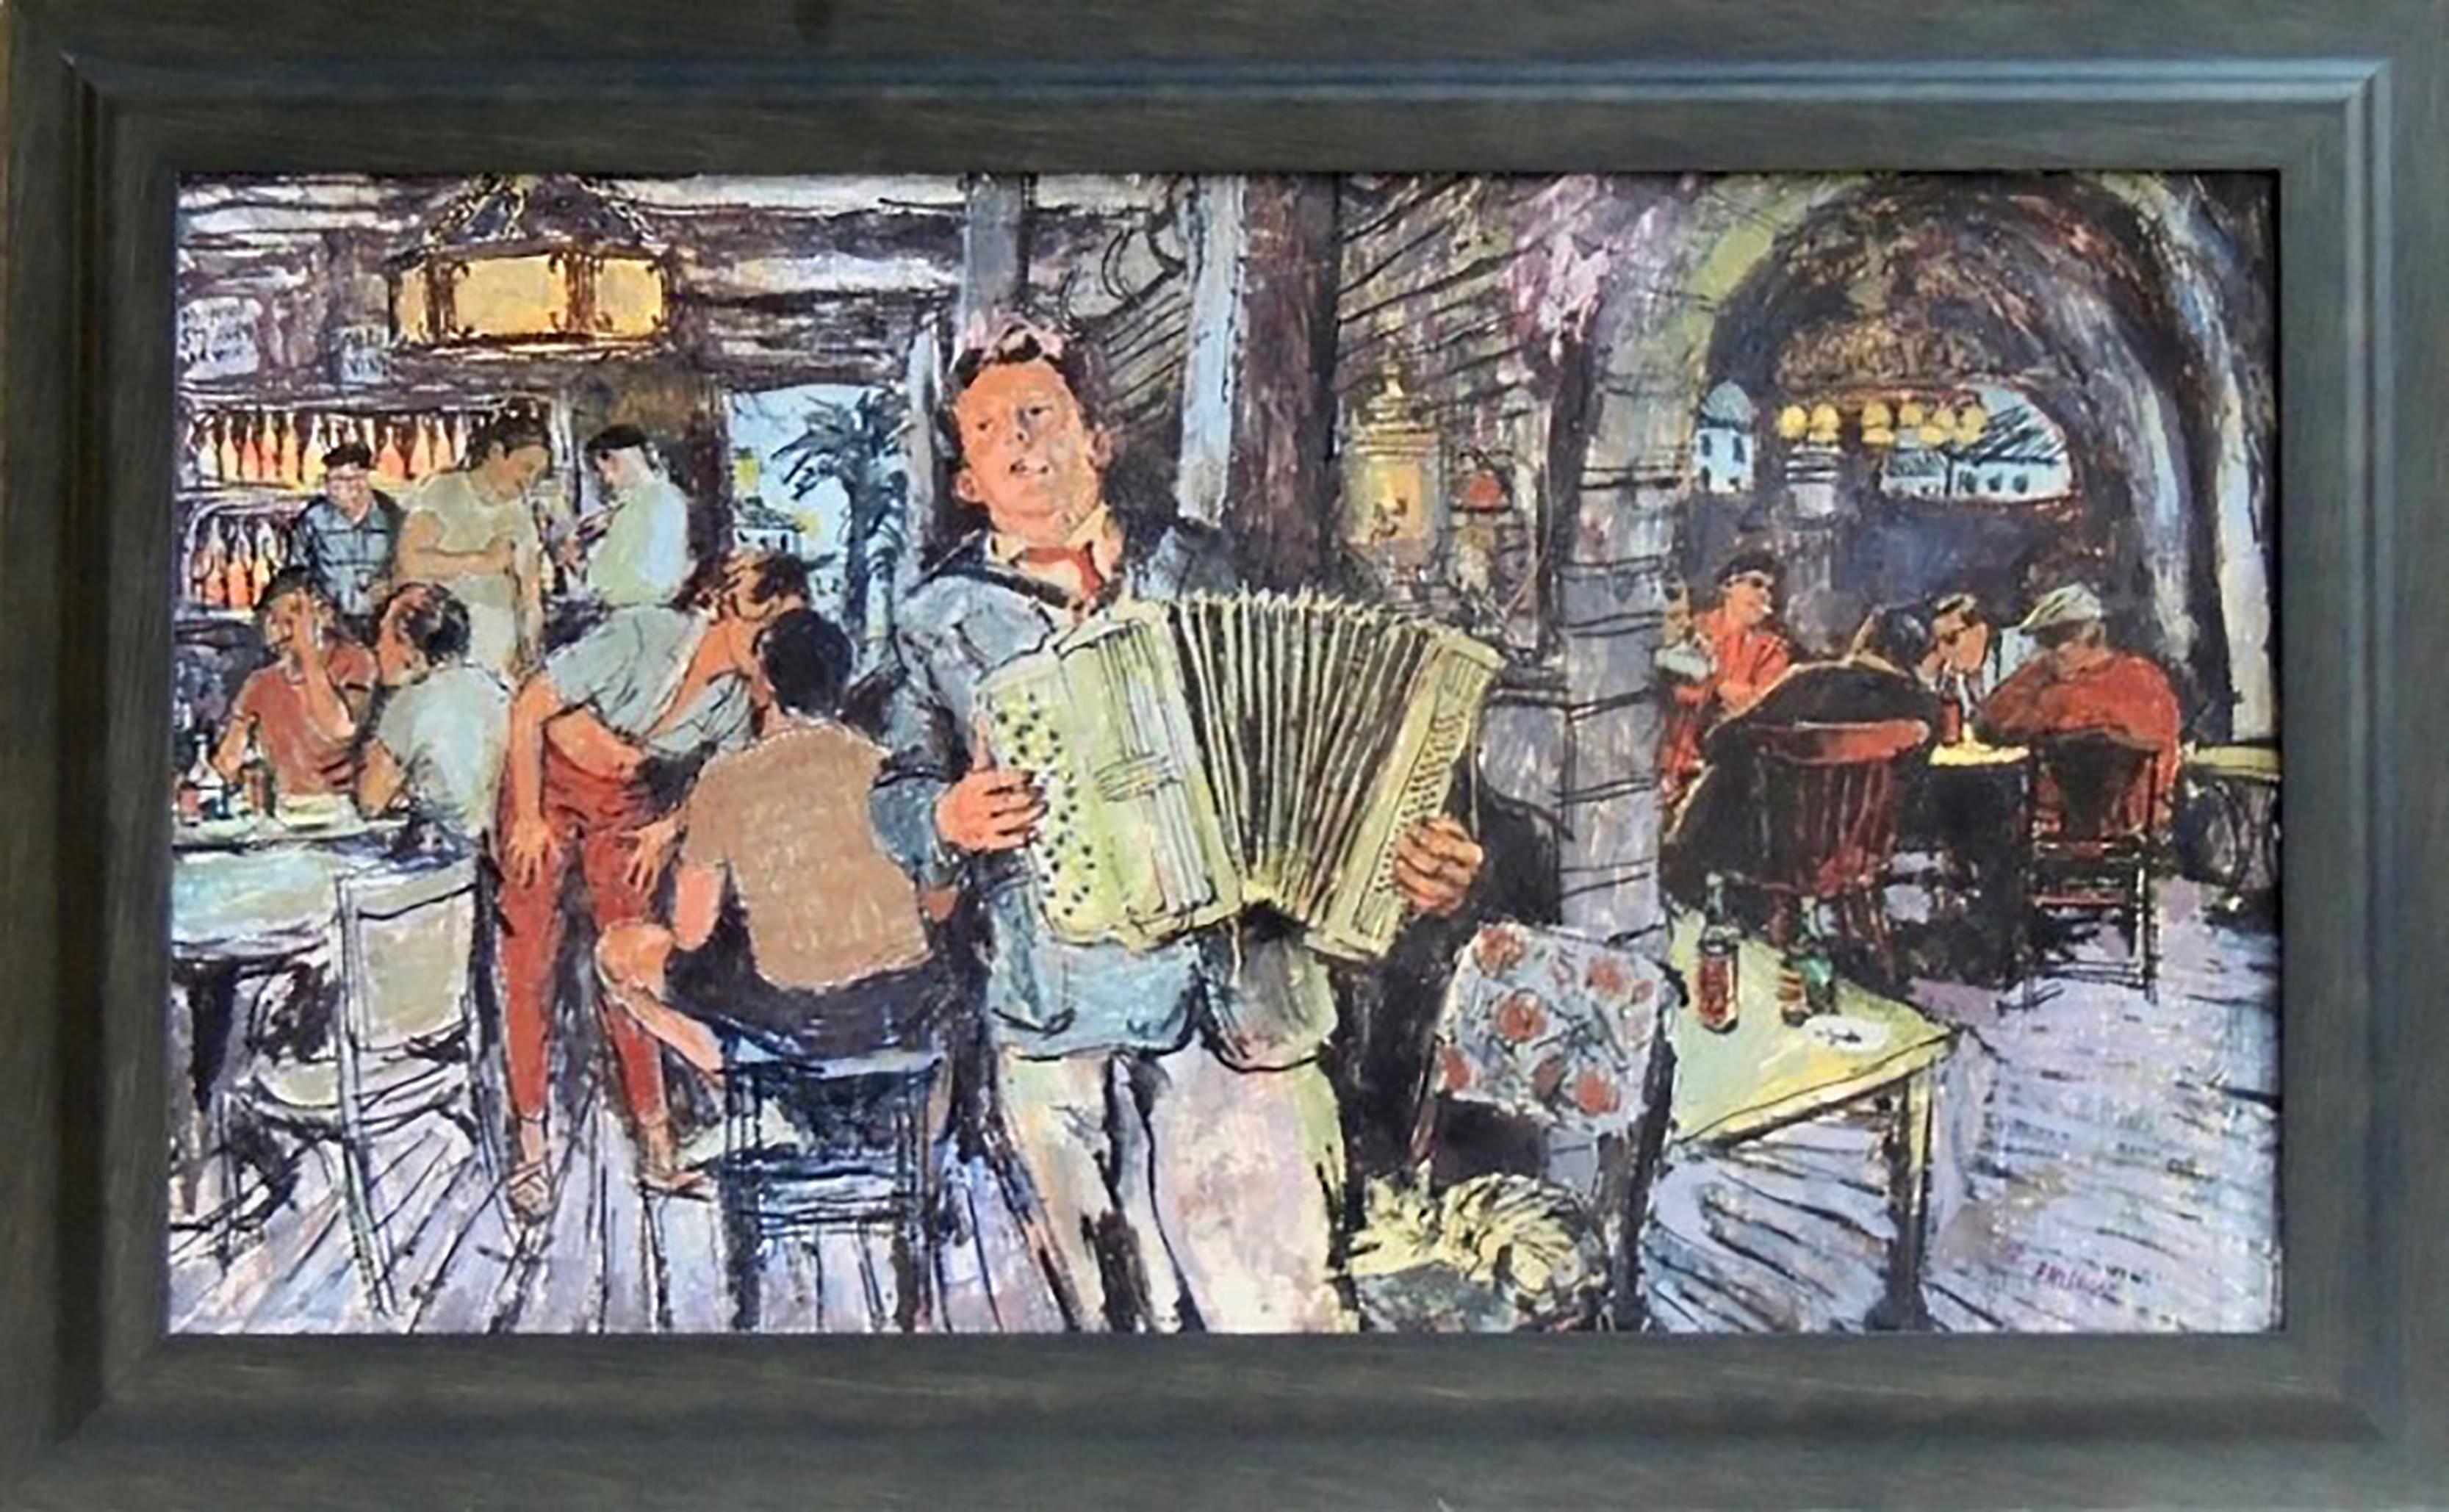 Accordion Player in Tavern - Art by Marvin Friedman